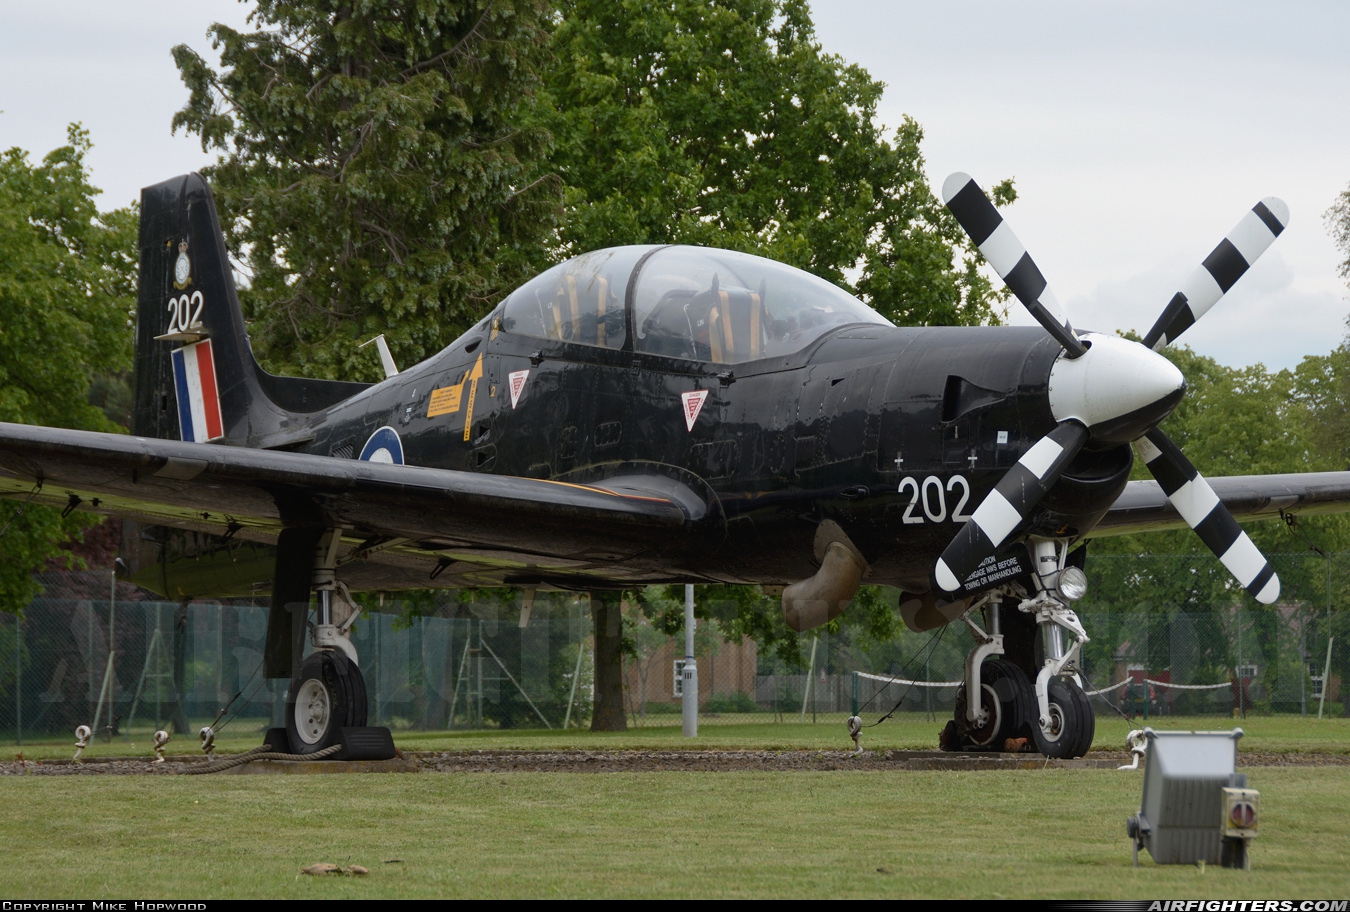 UK - Air Force Short Tucano T1 ZF202 at Linton on Ouse (EGXU), UK